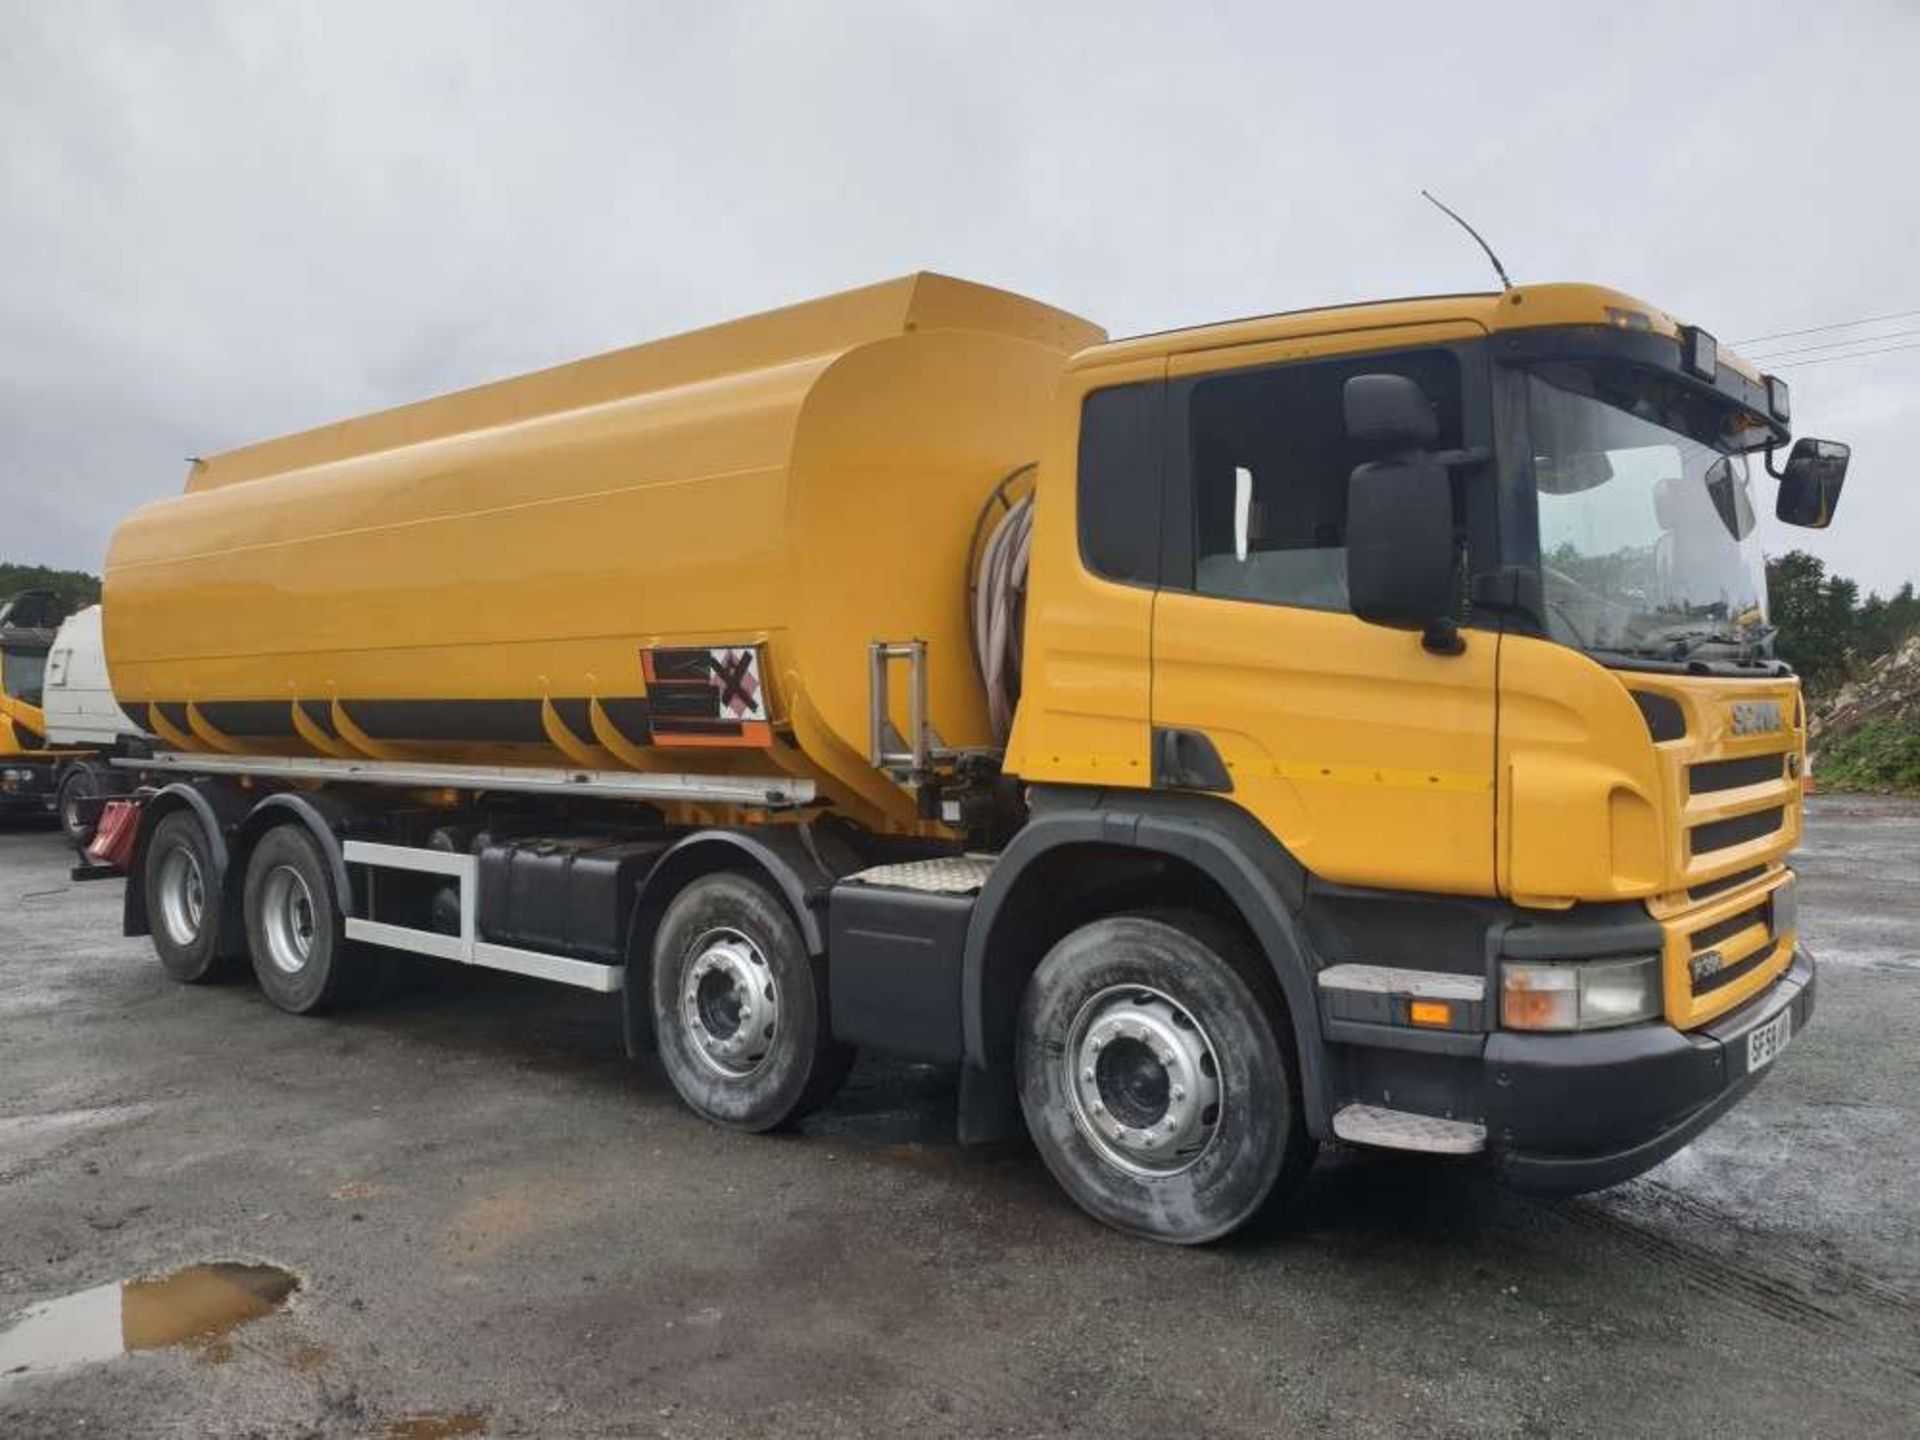 2008 58 reg Scania P380 Petrol Fuel Tanker (Sold on Site - Location Knutsford)